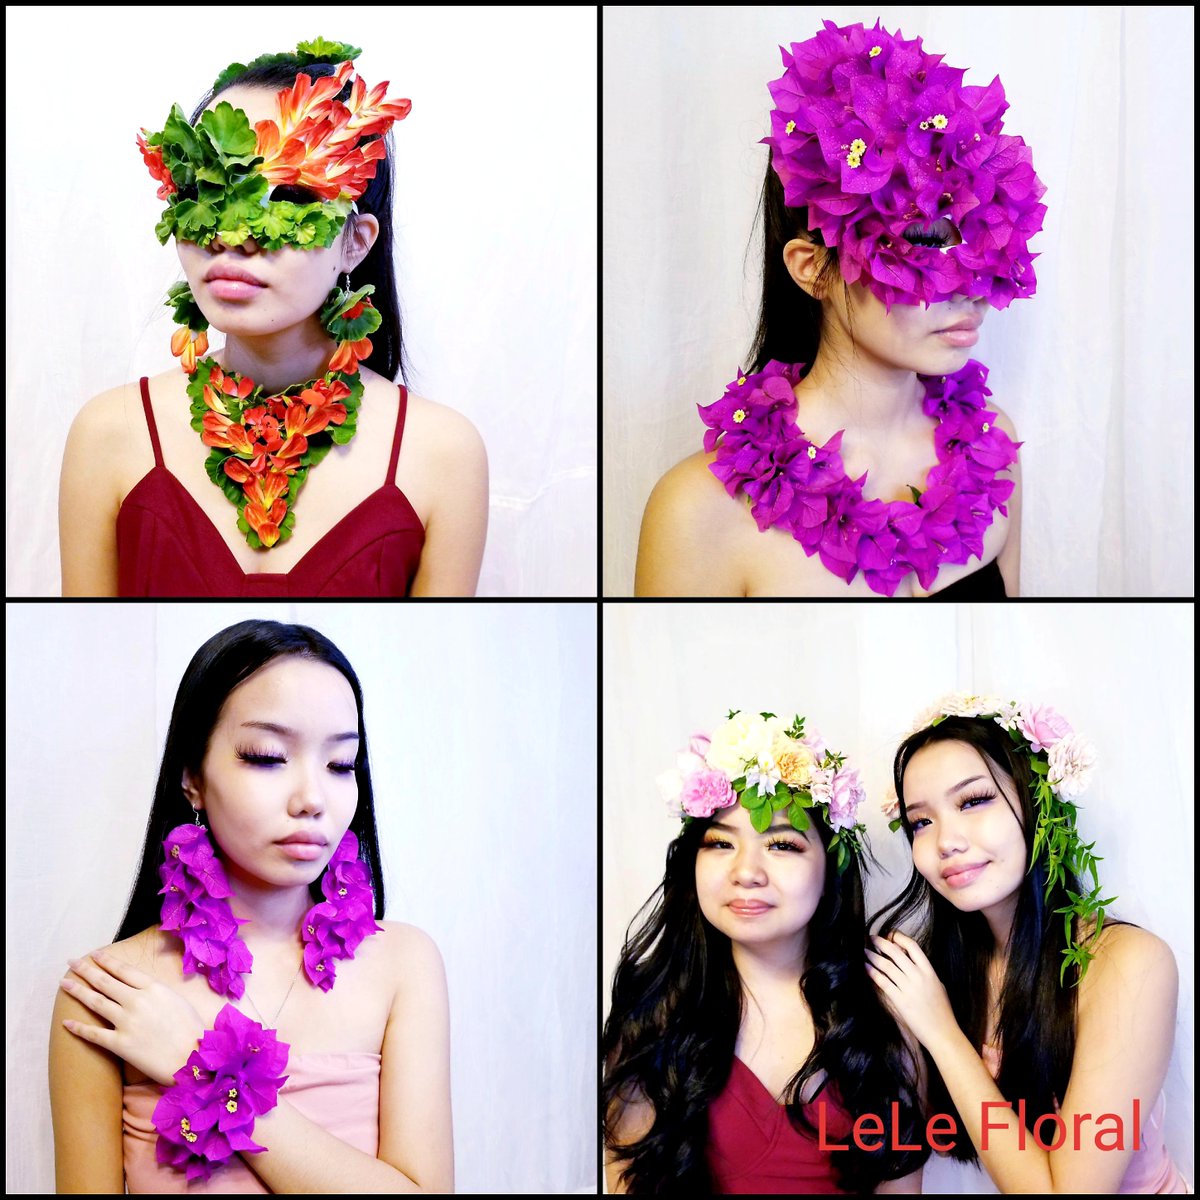 The Art Wearable Flowers Flowers and Body Accessories with real Flowers by LeLe Floral 
#wearableflowers #nofloralfoam #floralheadpiece #wearableflowers #fineartflorals #fineartflowers #blooooms #floralcrown #floralart